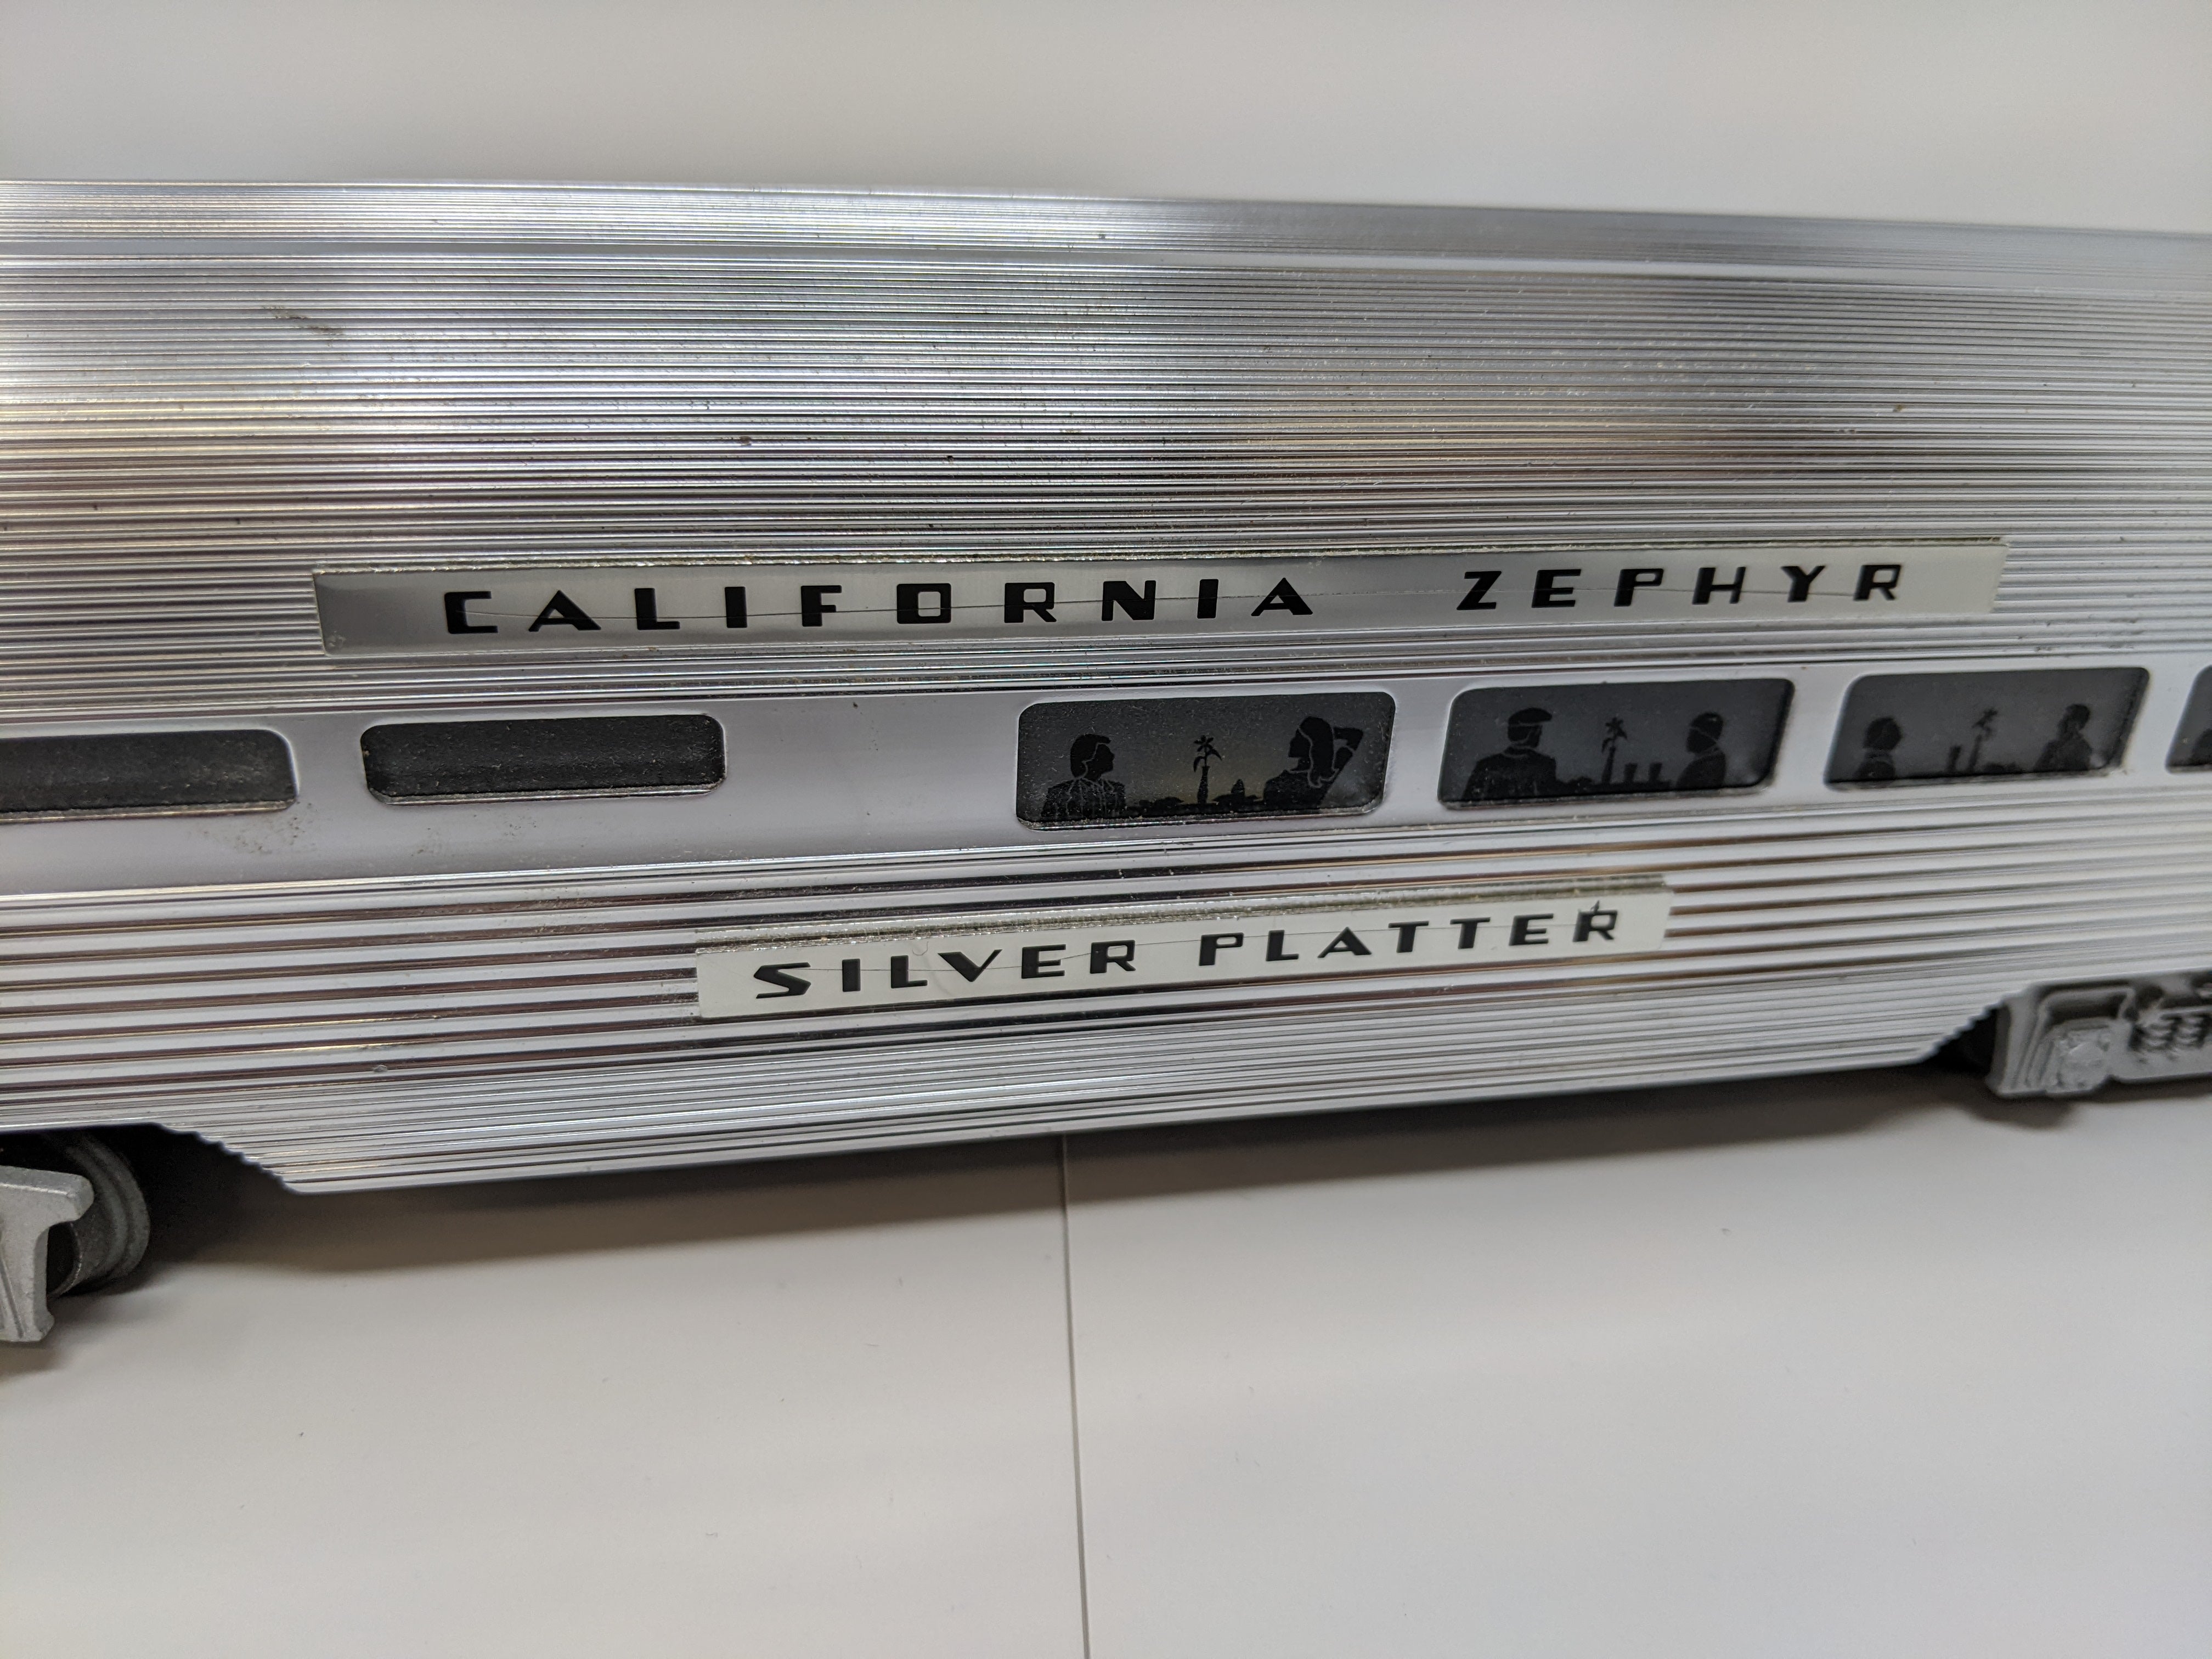 USED Lionel O, Aluminum Passenger Car, Western Pacific #Silver Platter, Lighted